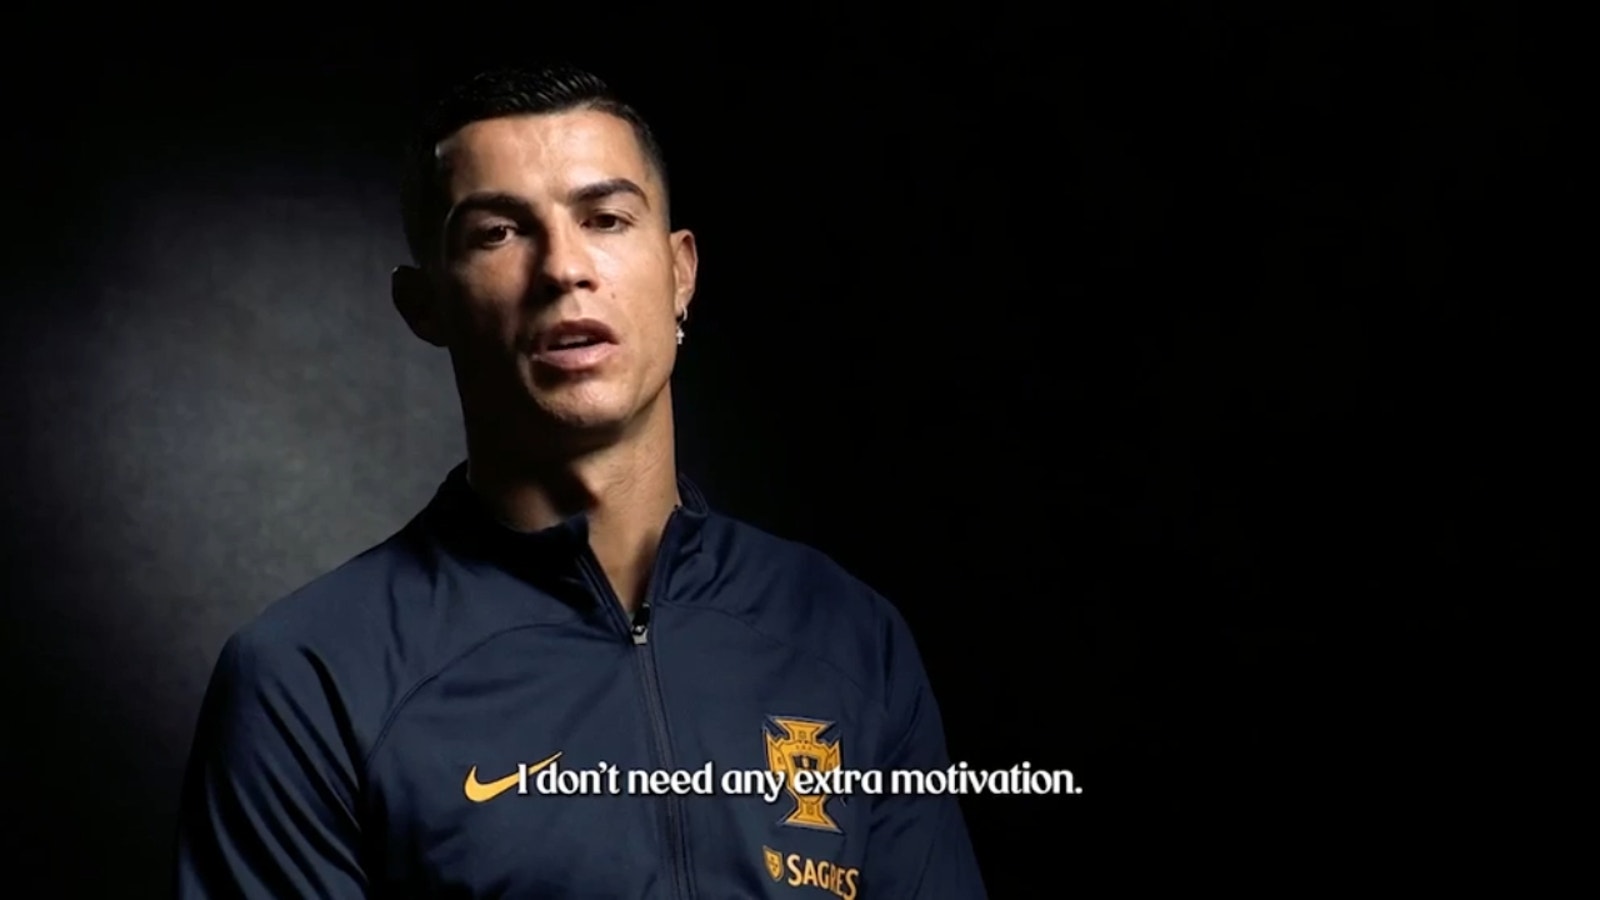 Cristiano Ronaldo wants to bring the World Cup title to Portugal